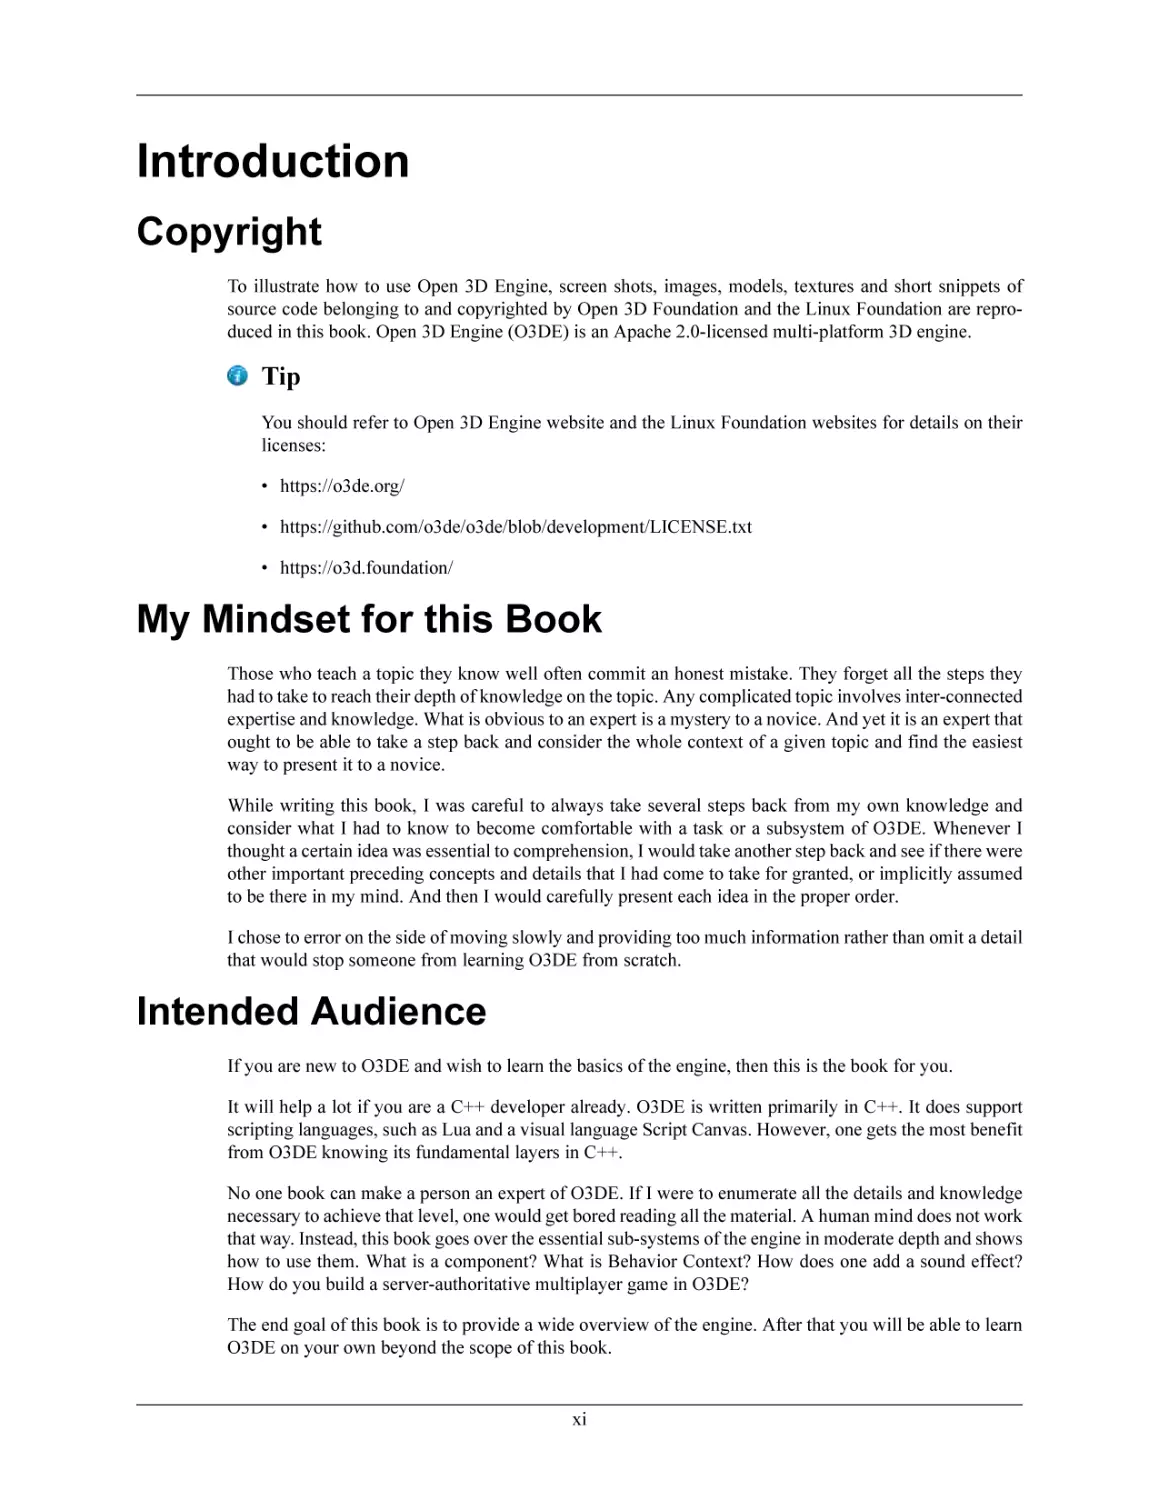 Introduction
Copyright
My Mindset for this Book
Intended Audience